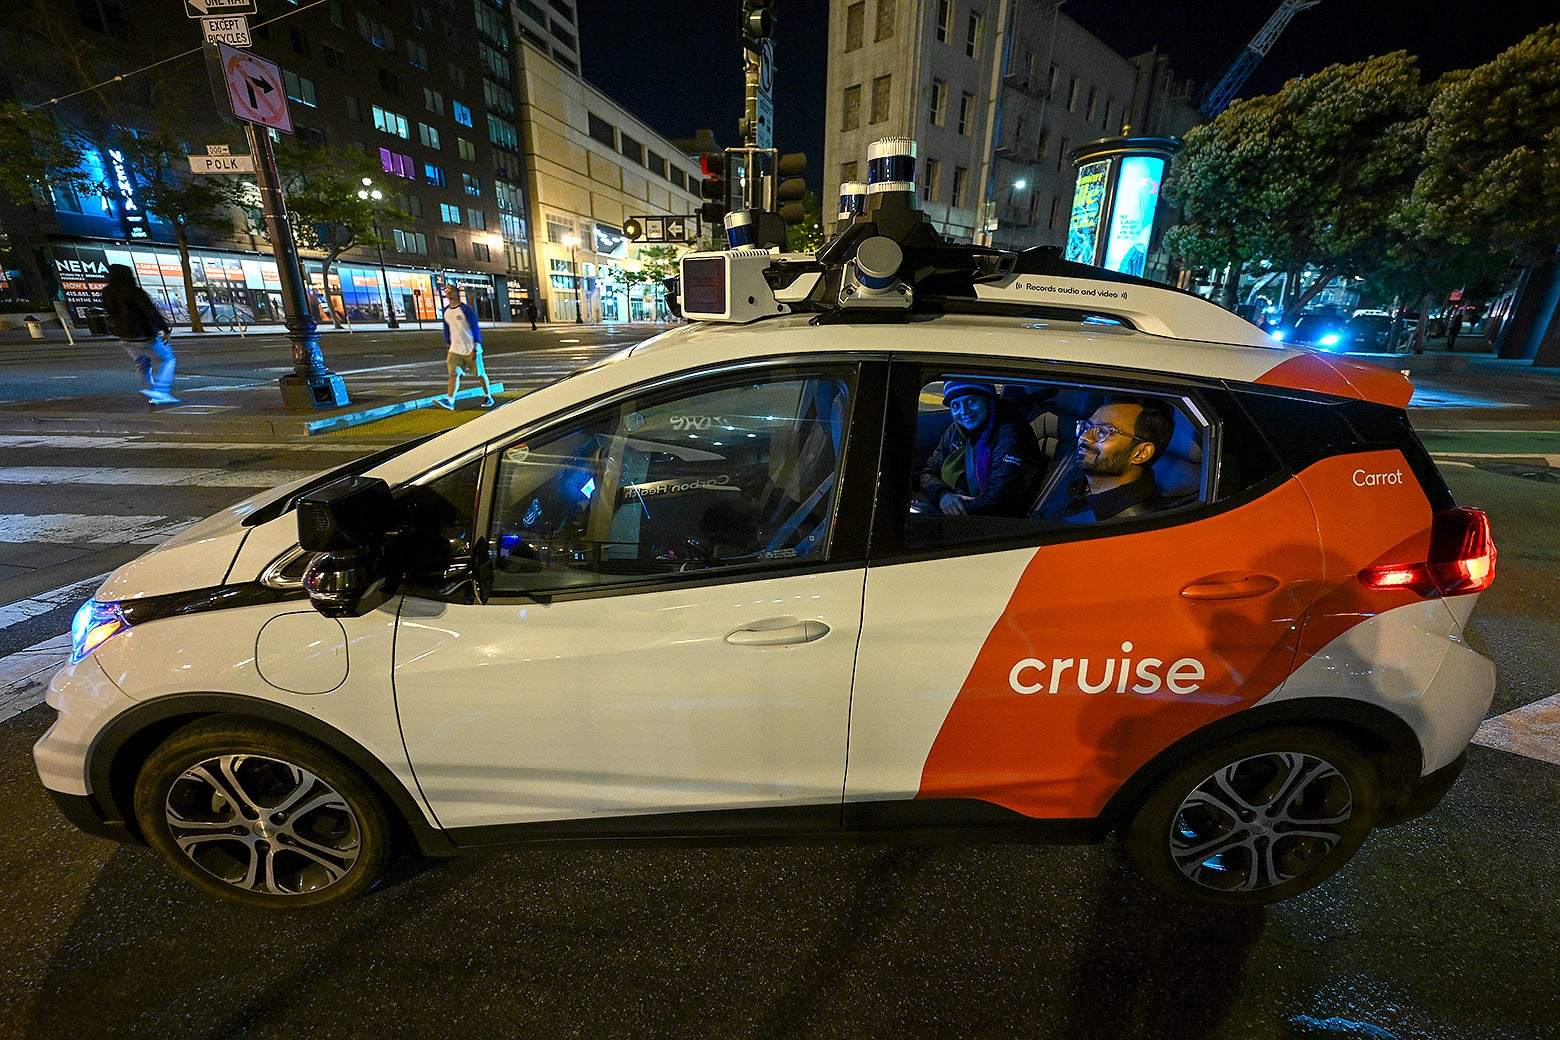 Cruise Robotaxis Were All Over San Francisco—and Poised to Go National. California Just Banned Them. David Zipper